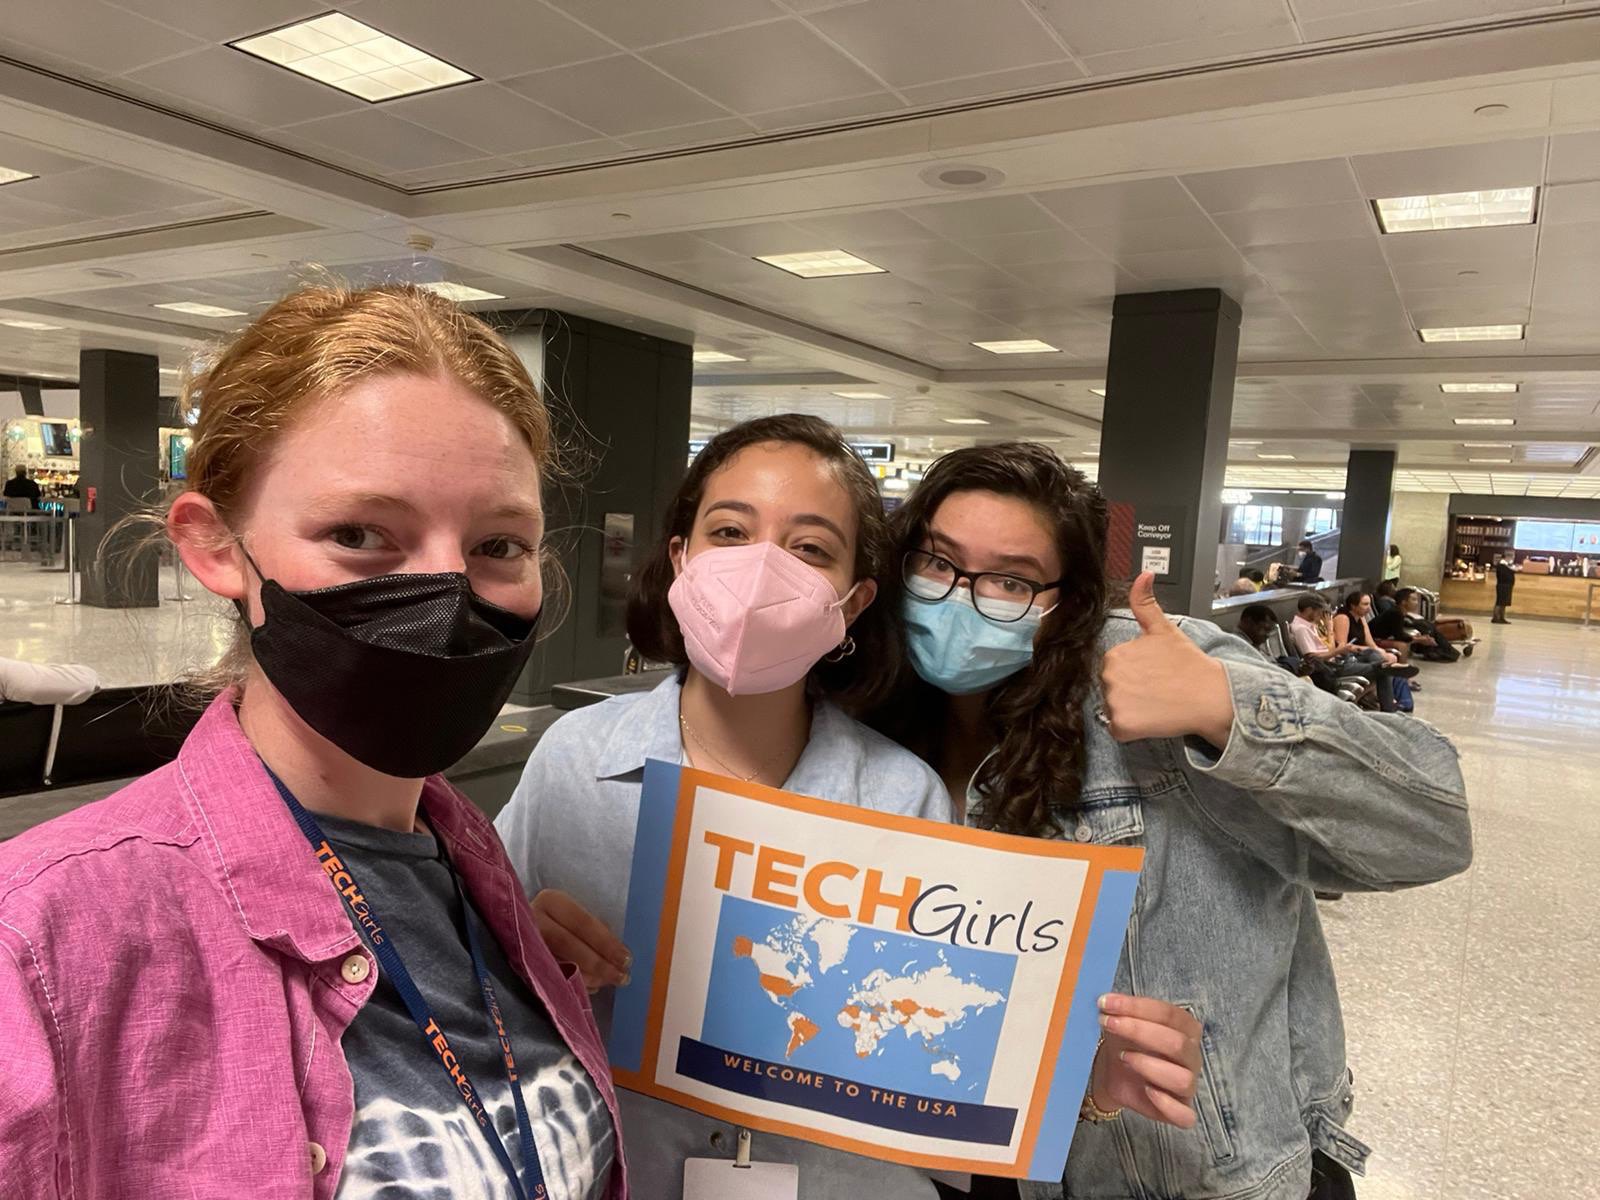 Three TechGirl Resident Assistants holding a "Welcome to the USA" sign at the airport.